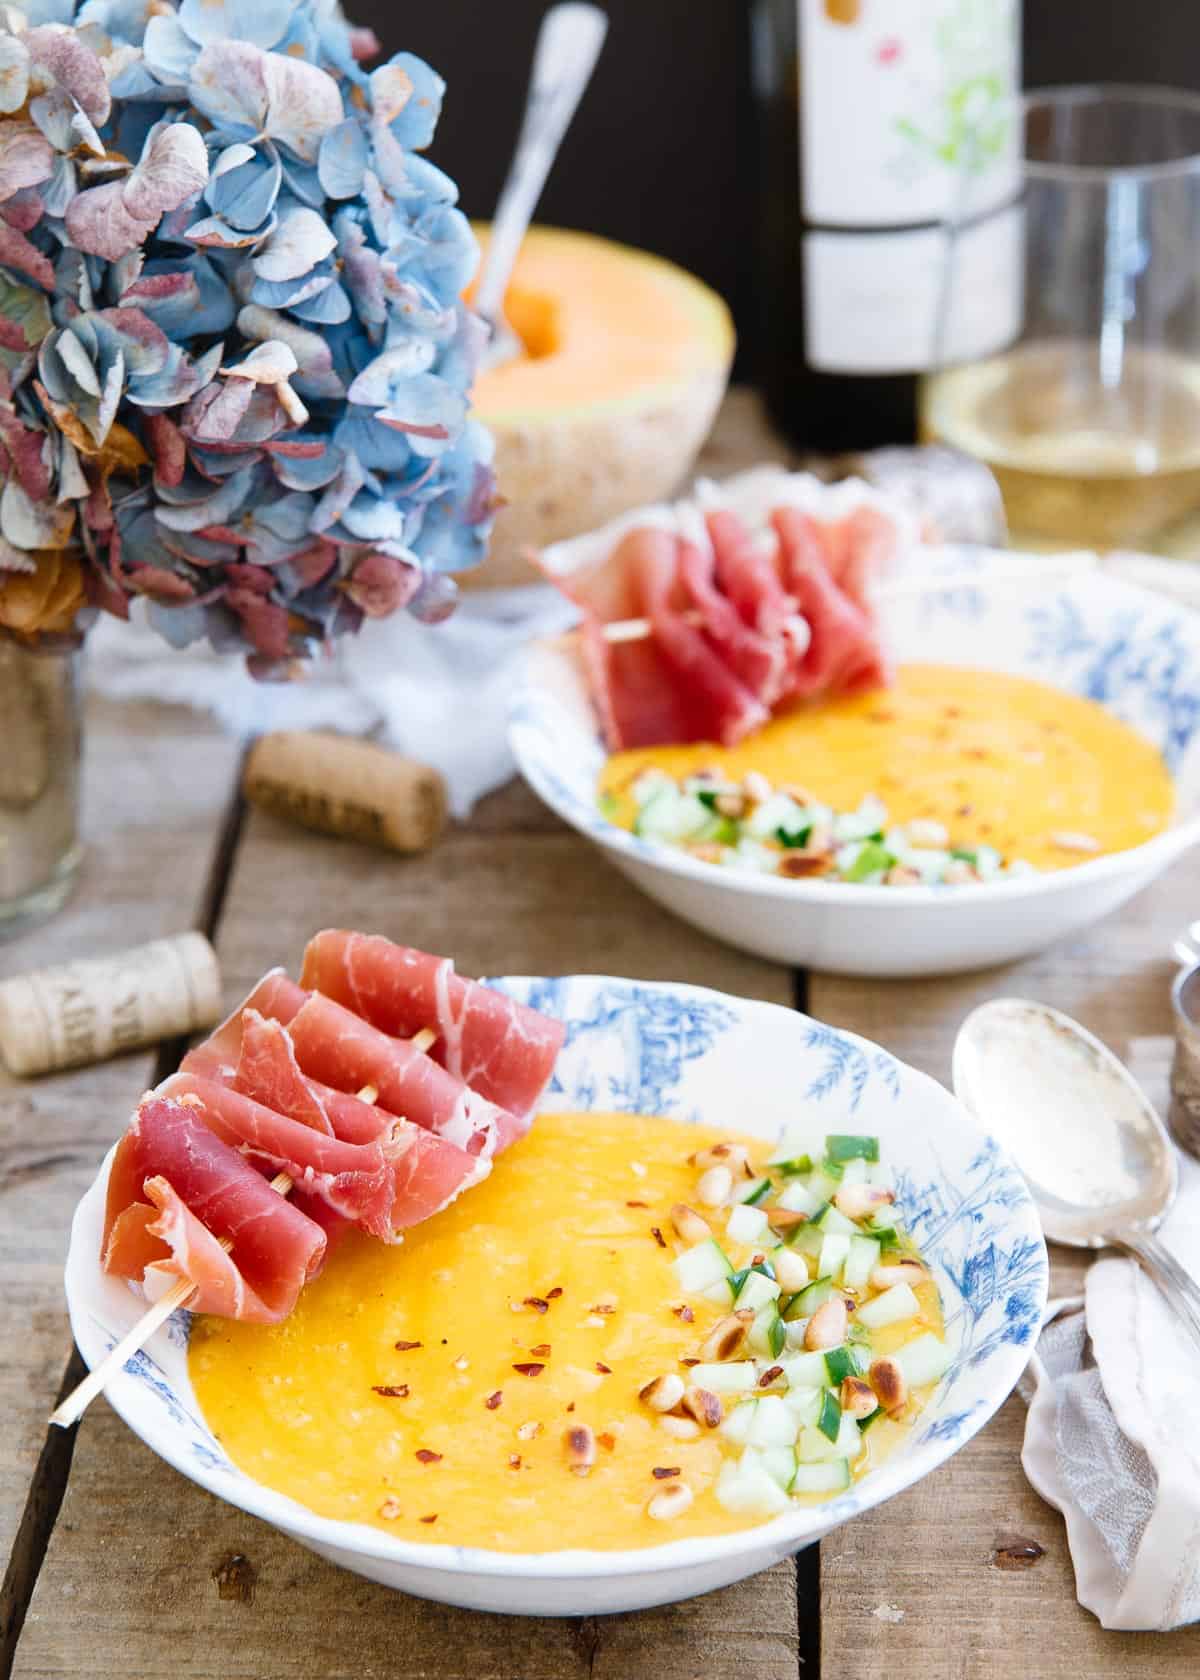 This chilled mango melon soup is garnished with tangy pickled cucumber and prosciutto skewers for a salty, sweet and cool summer dish.